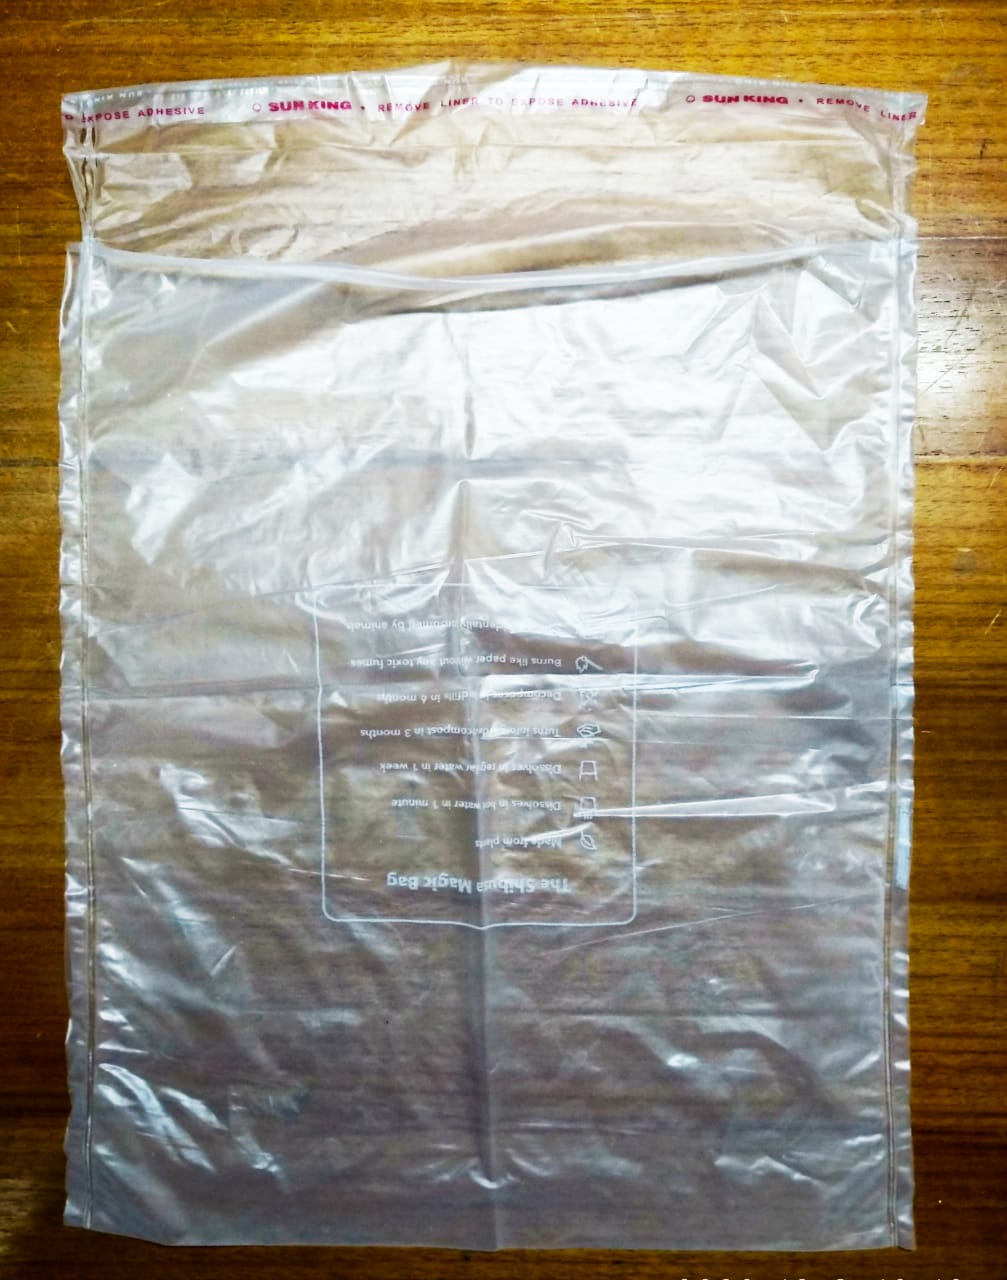 Biodegradable Water-Soluble Packing Bags - Medium - Pack of 100